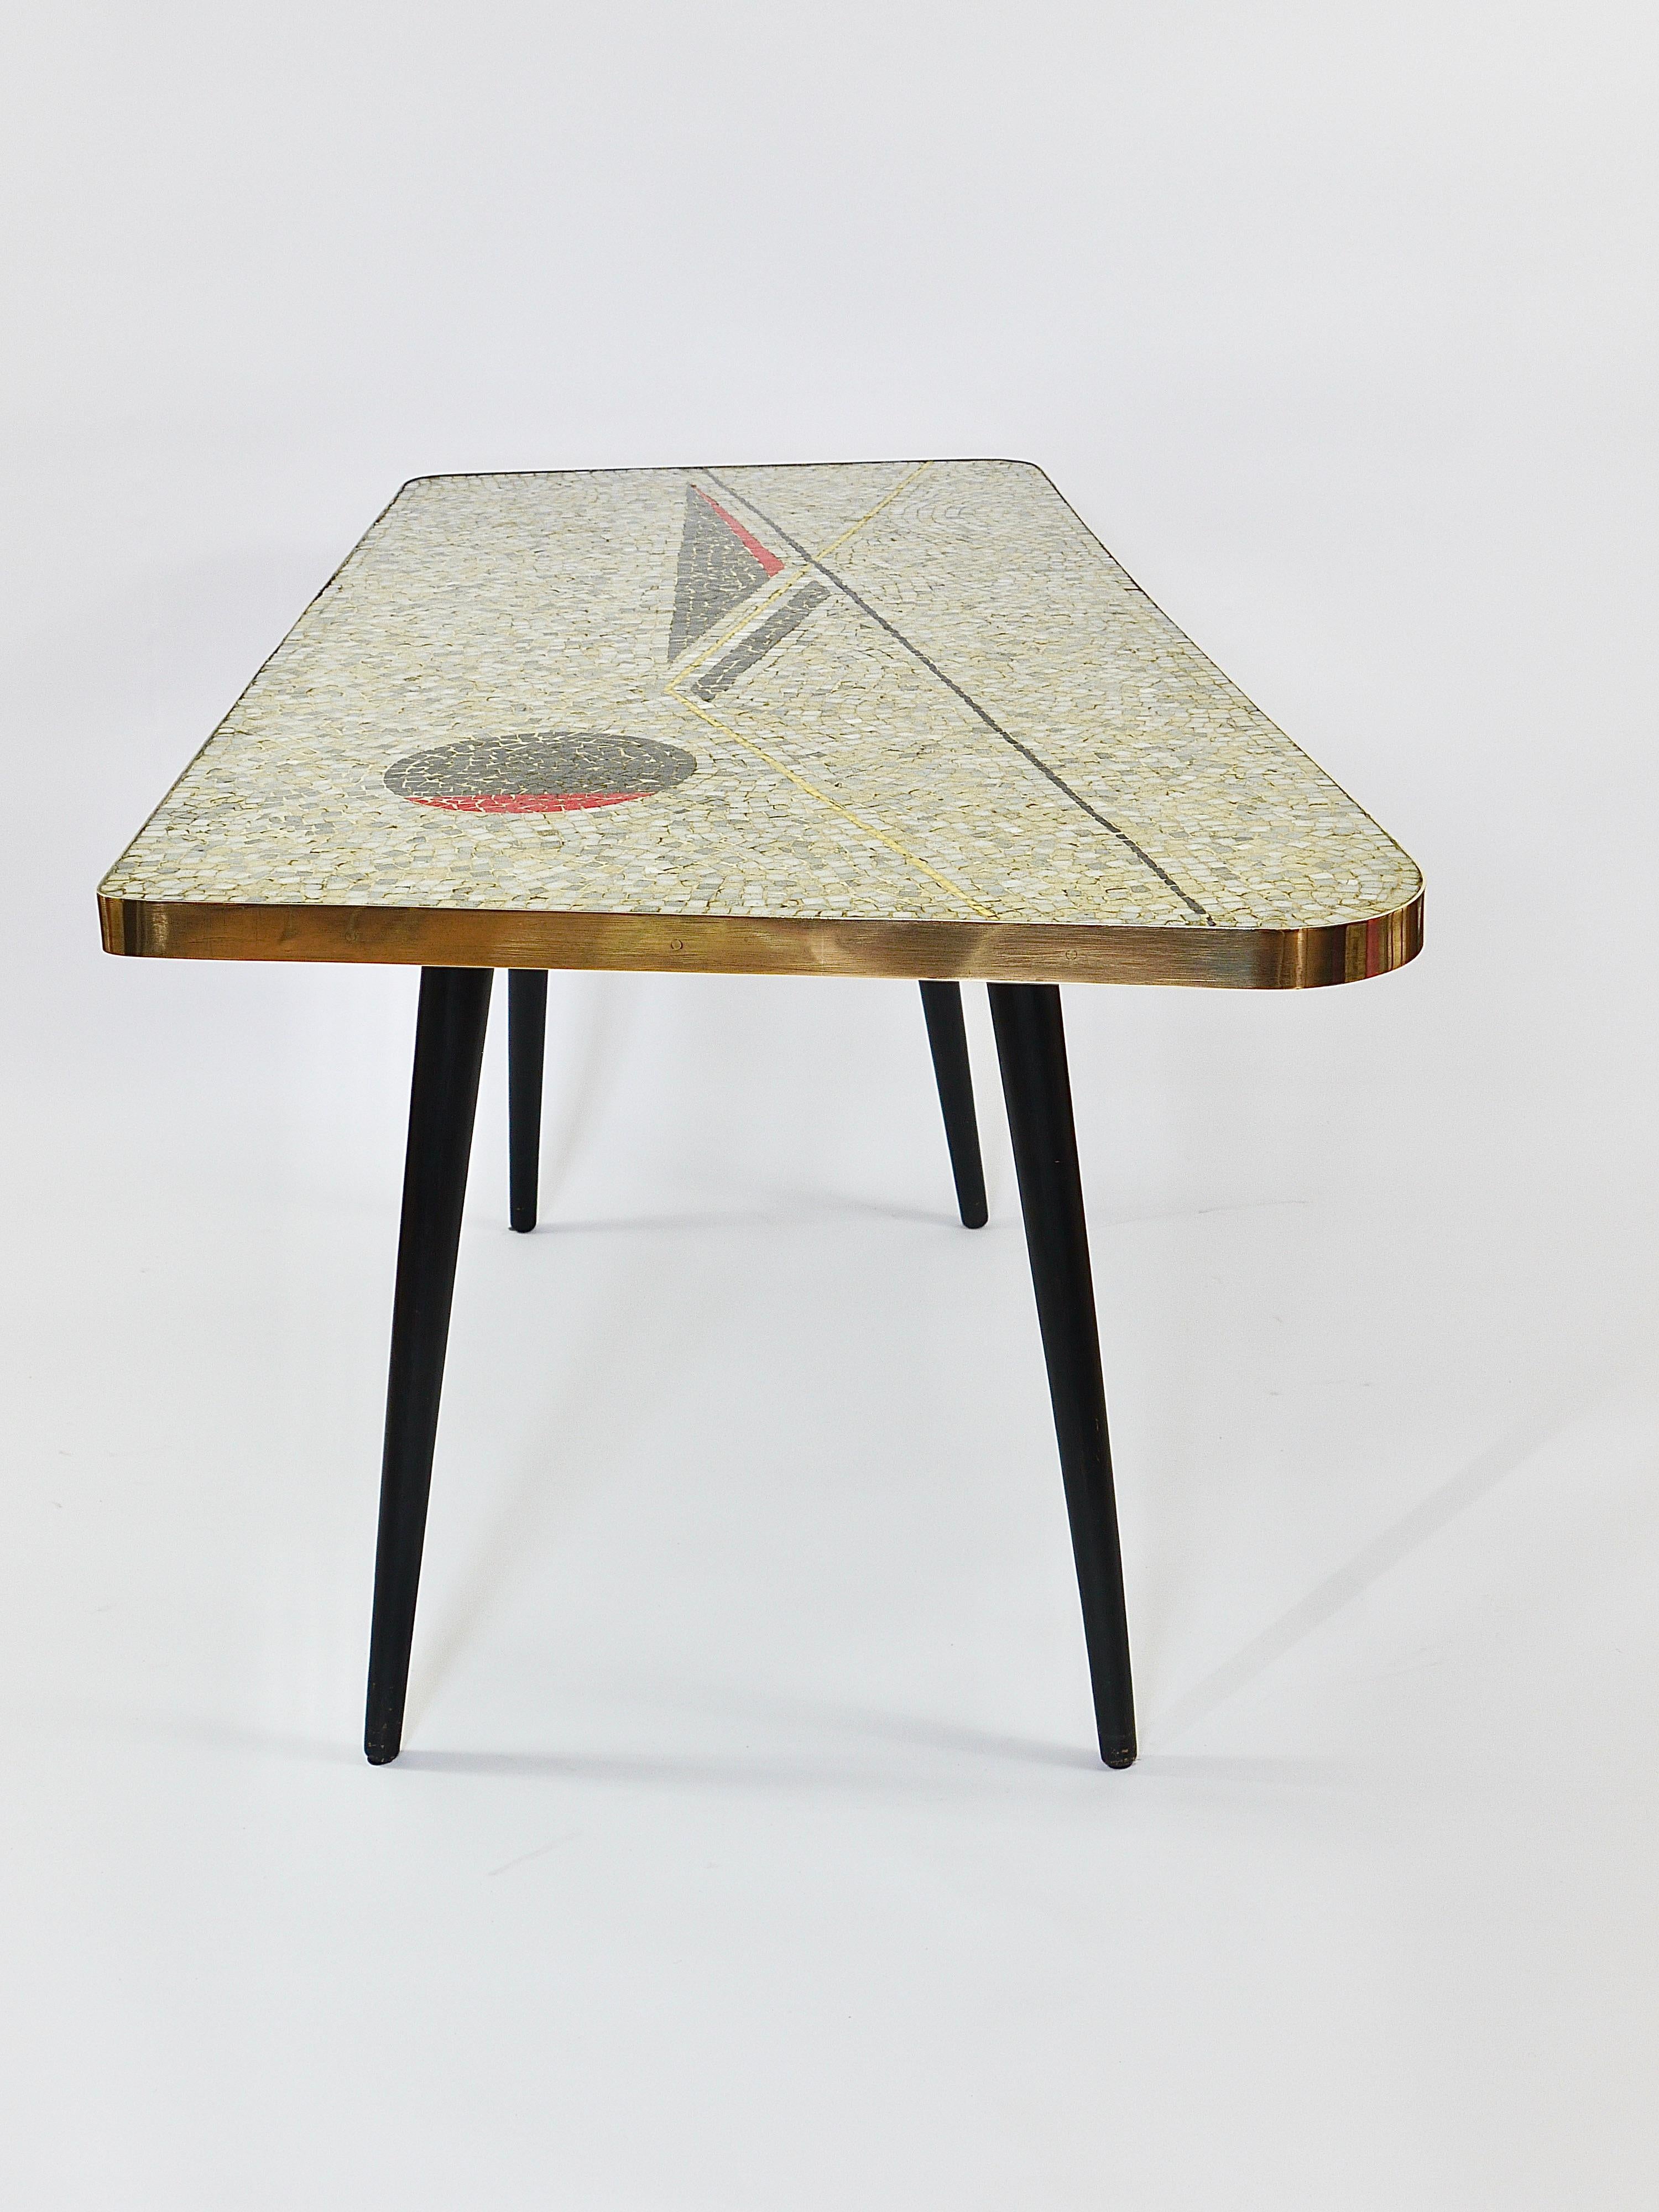 Berthold Muller Asymmetrical Mosaic Tile Coffee or Sofa Table, Germany, 1950s For Sale 12